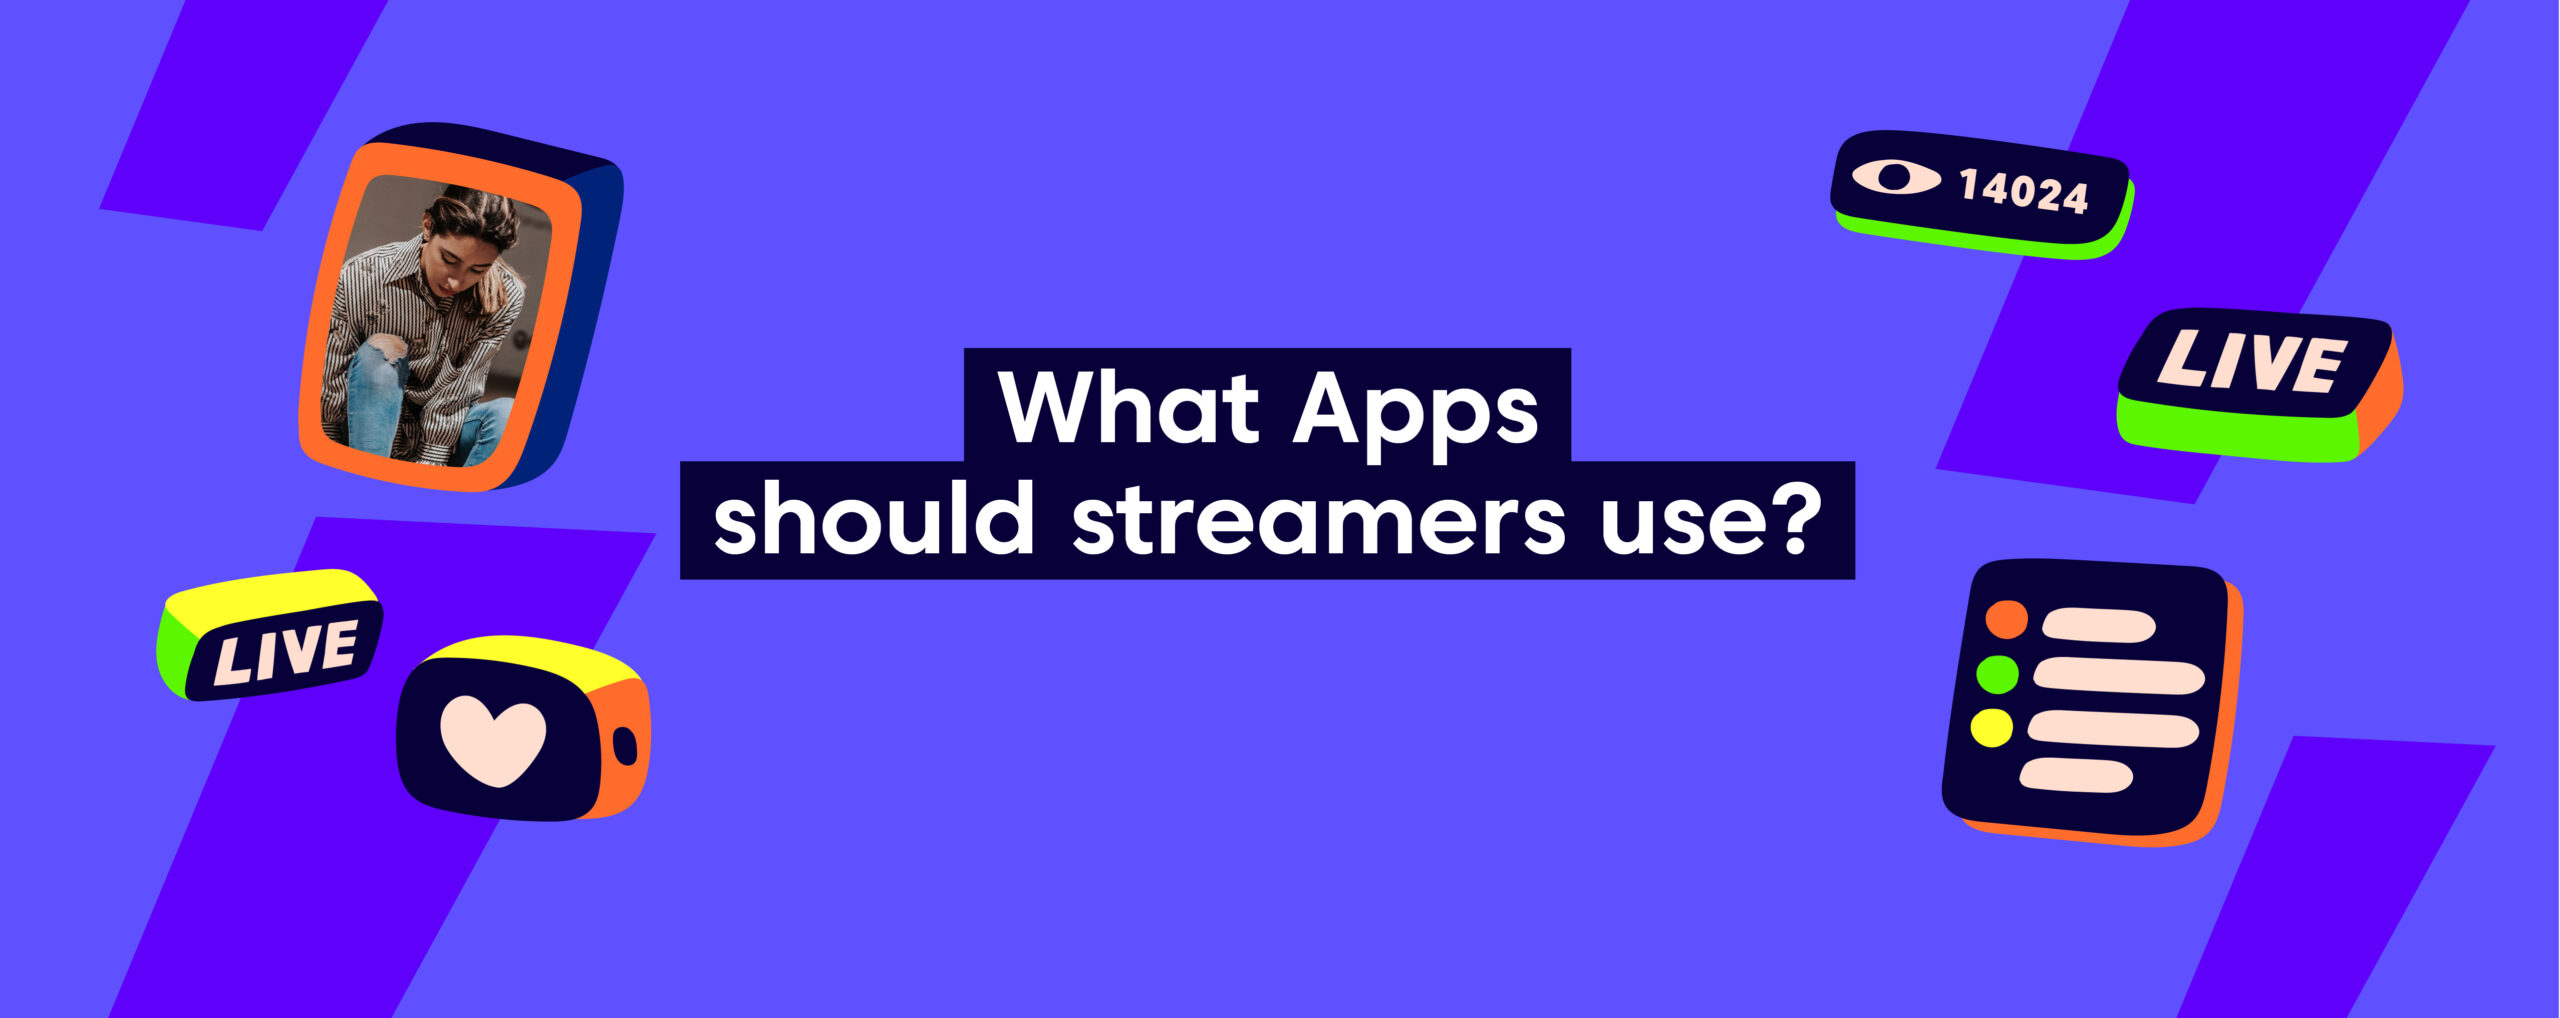 What Apps should streamers use?